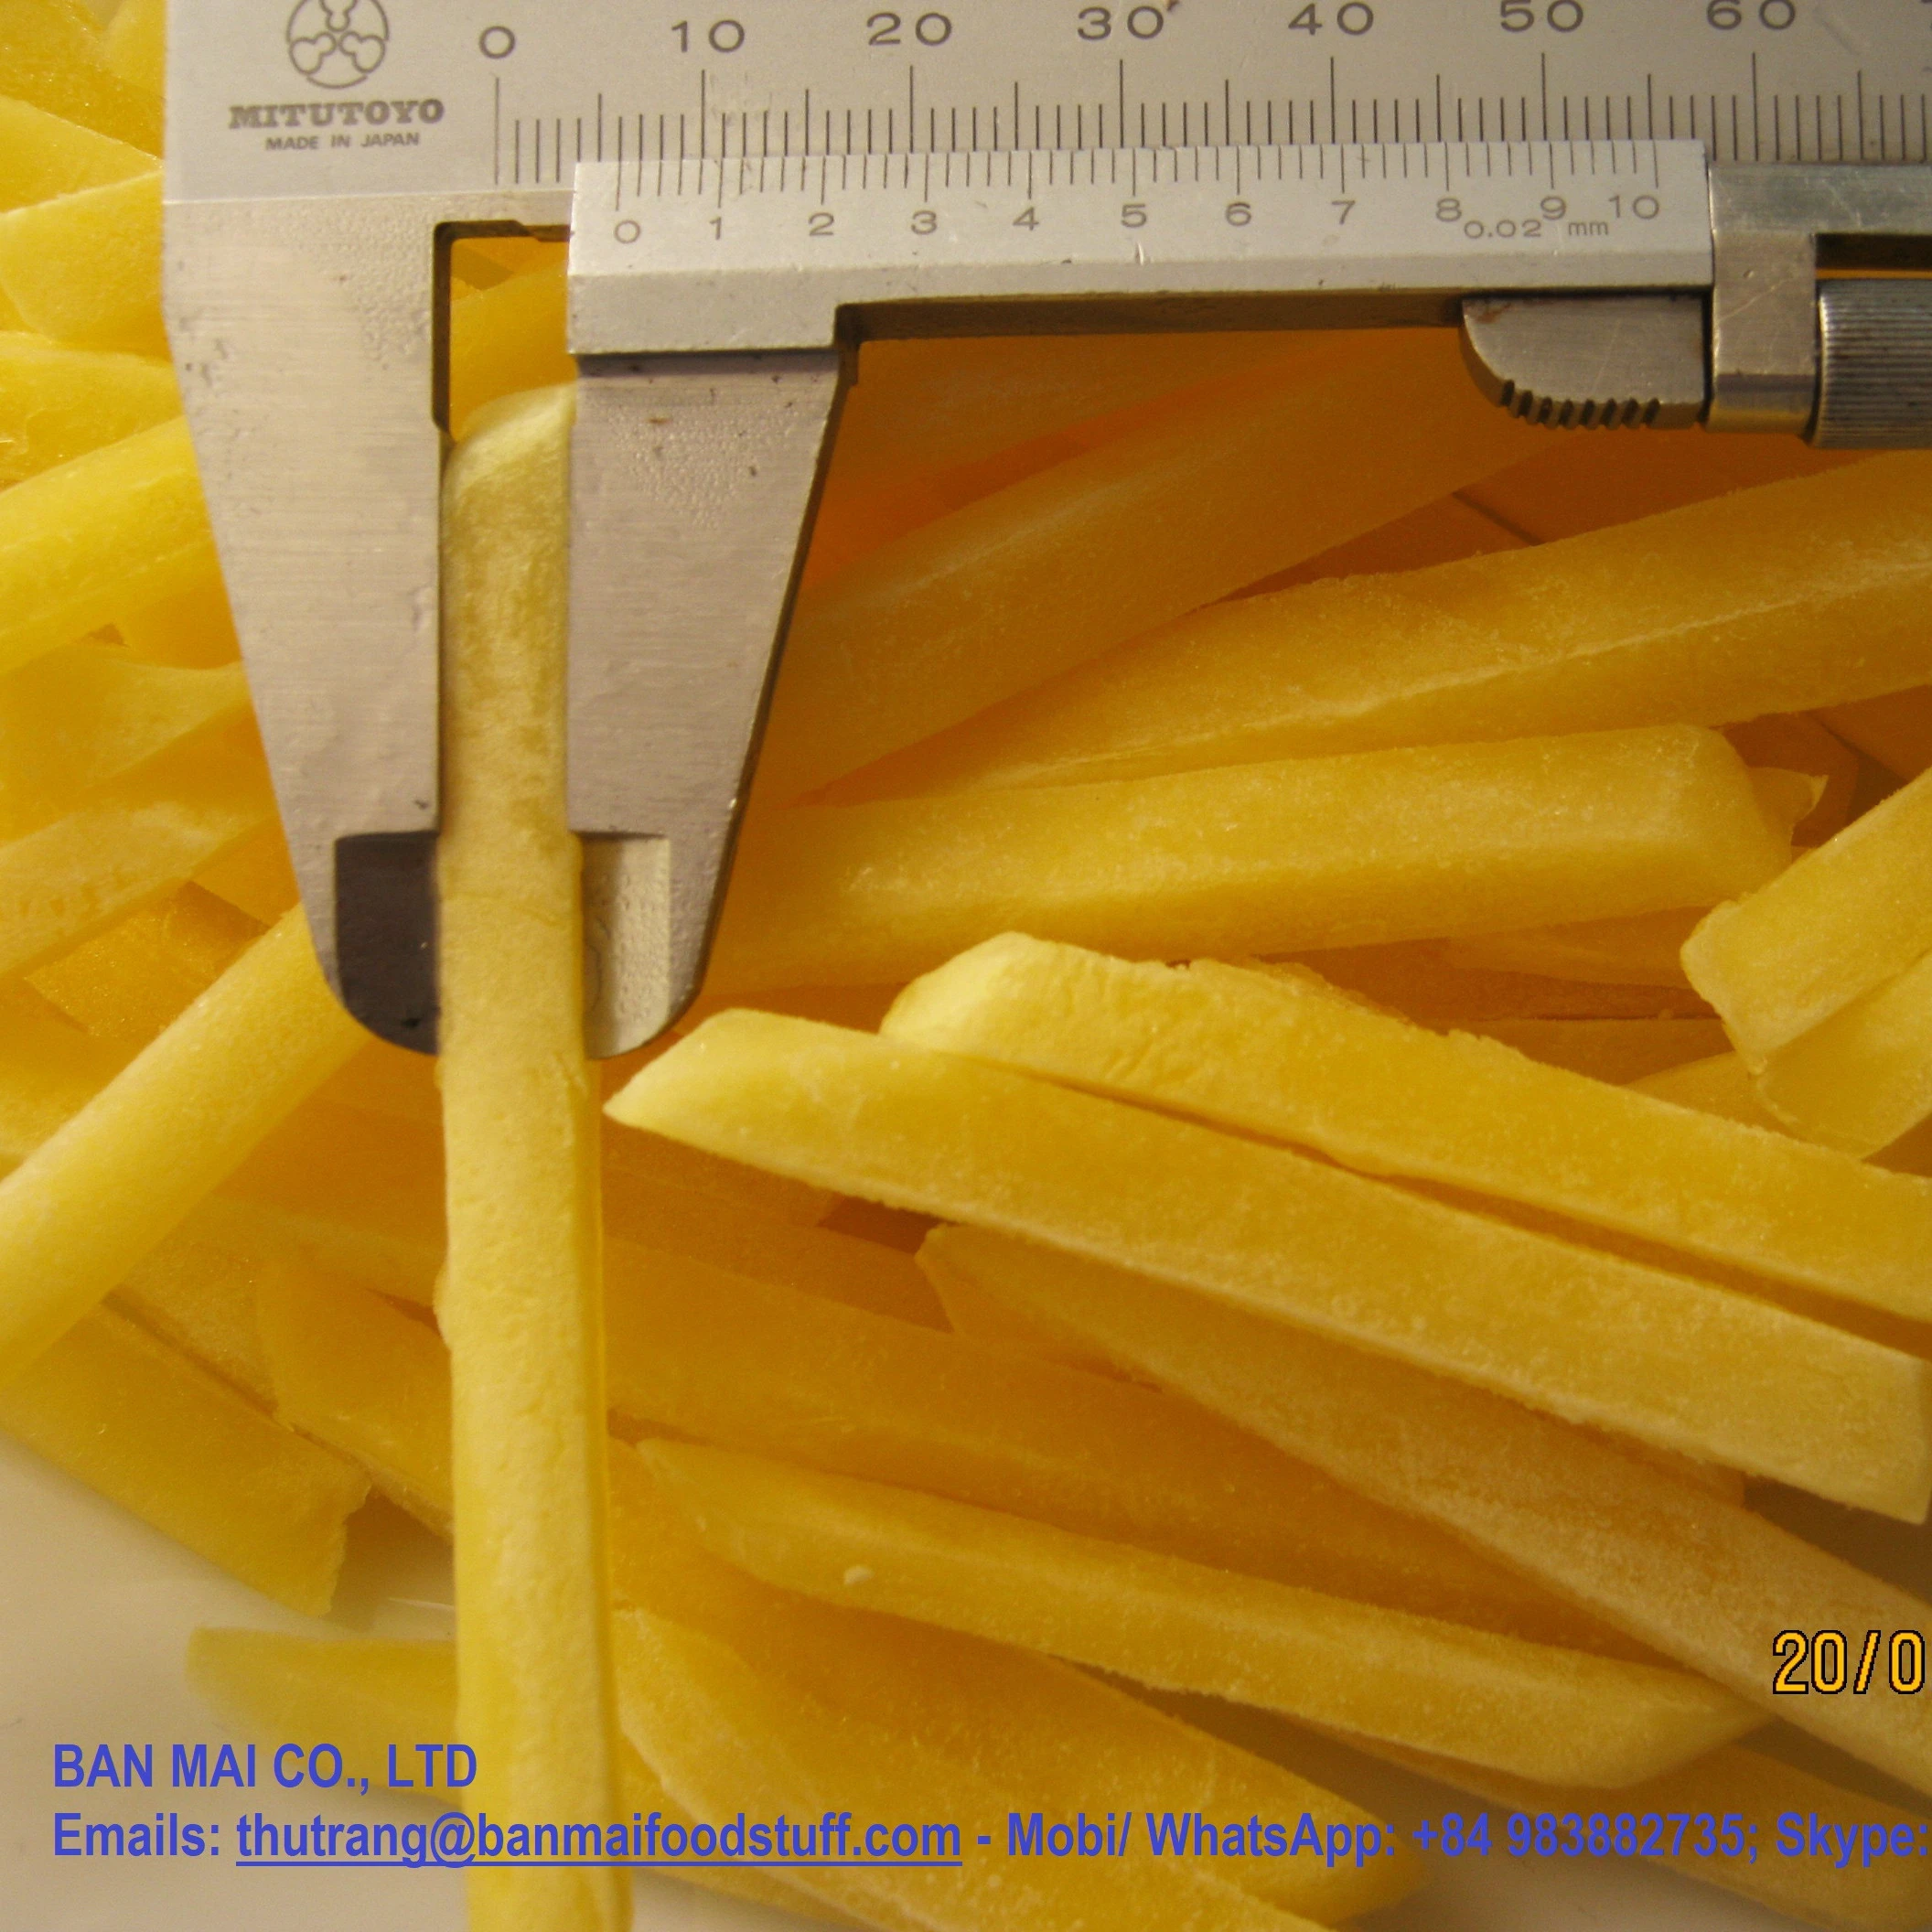 VIETNAM DAIRY VEGETABLES PRODUCT OF IQF FROZEN SWEET POTATOES STRIPS/ SLICES GOOD QUALITY COMPETITIVE PRICE